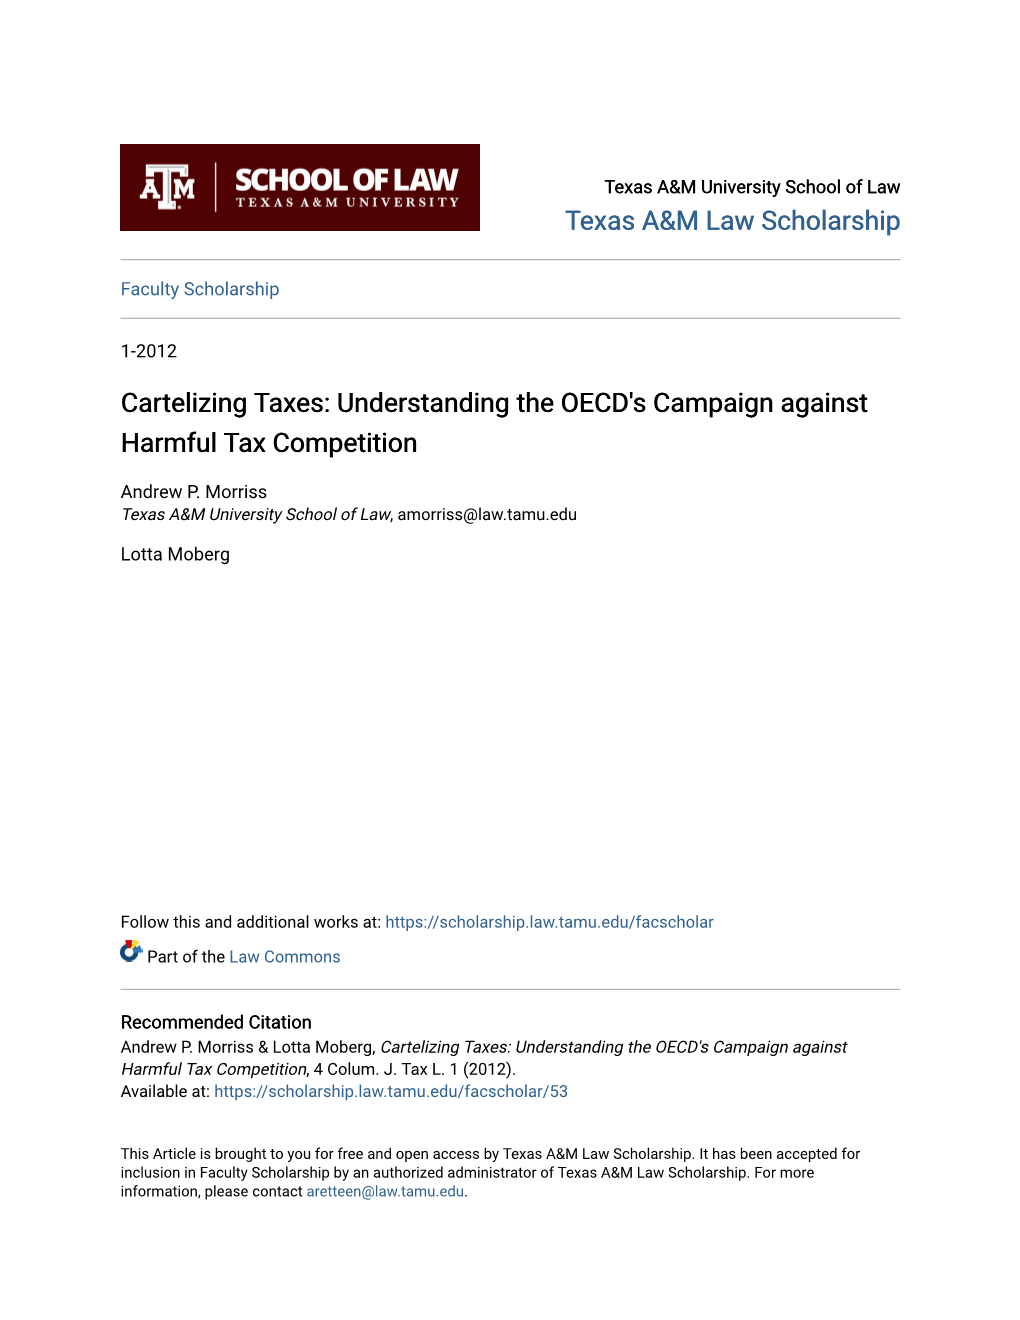 Cartelizing Taxes: Understanding the OECD's Campaign Against Harmful Tax Competition